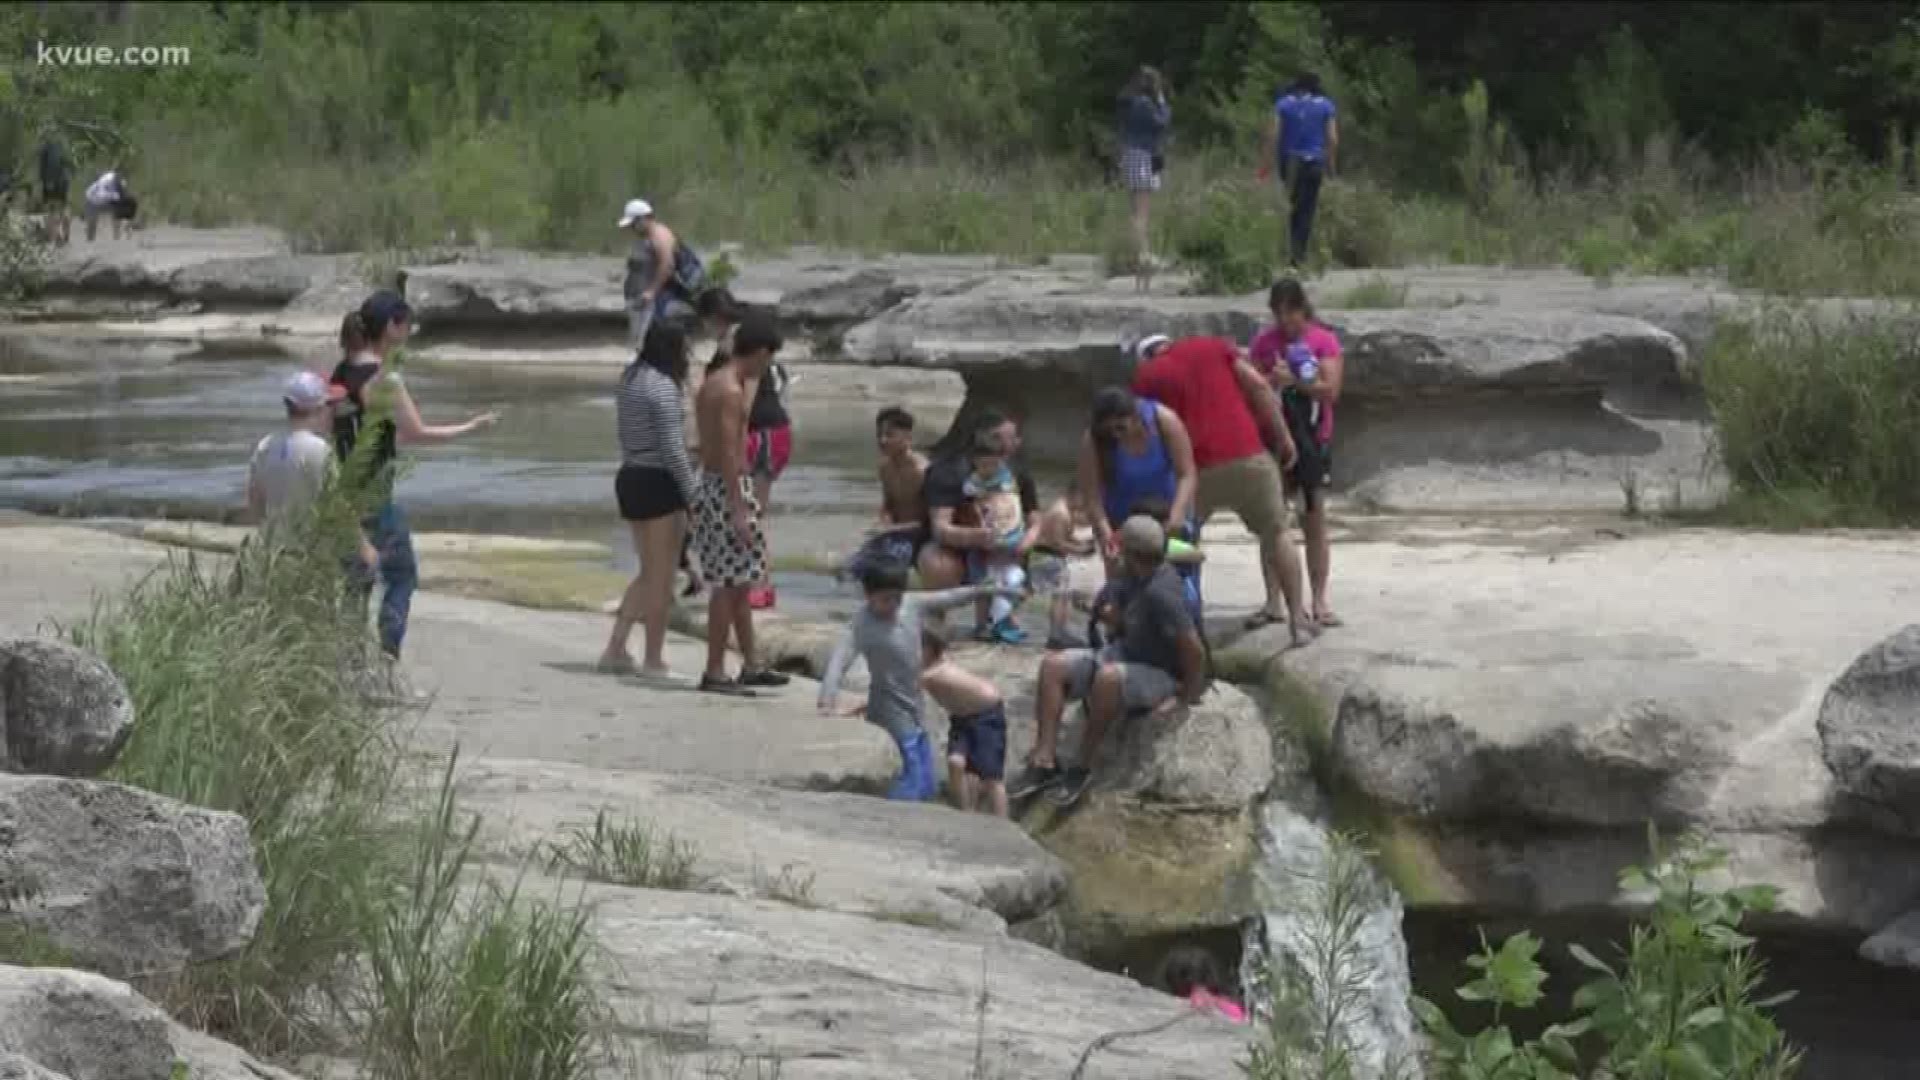 KVUE's Daranesha Herron visited a few parks, including one that was forced to stop letting people in because too many showed up.